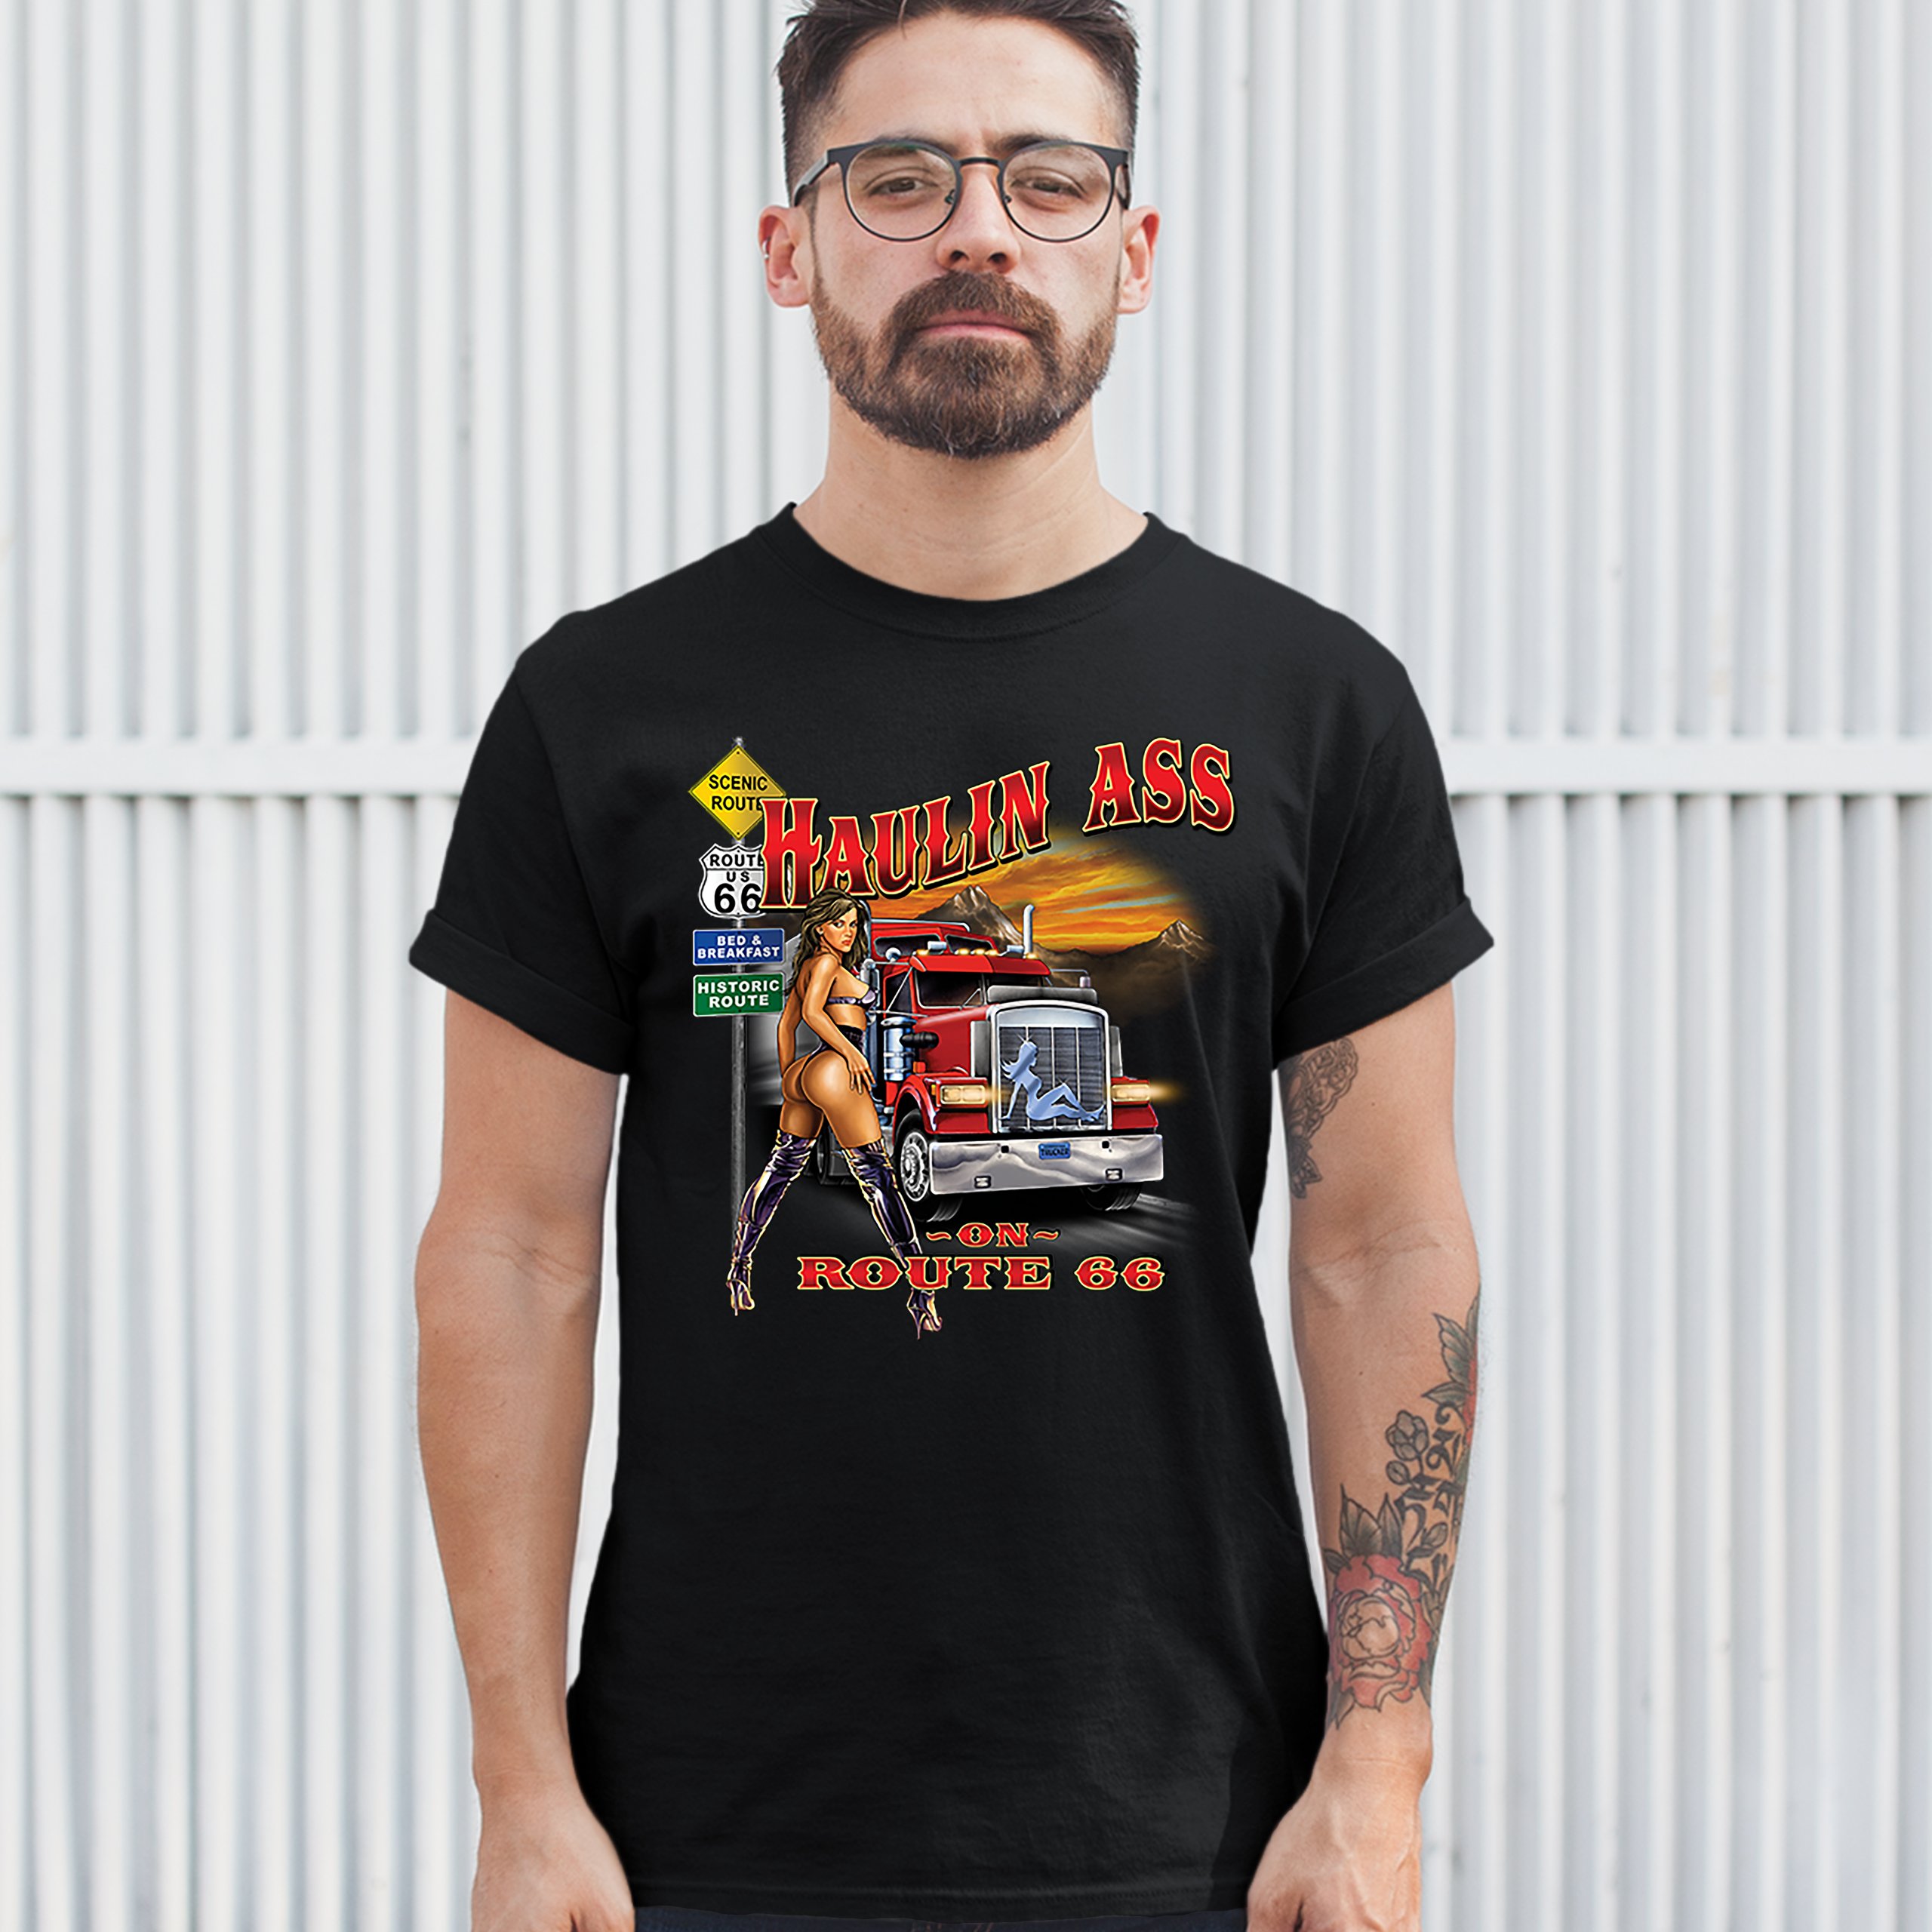 Haulin Ass on Route 66 T-shirt Historic Route 66 Trucker Teamster Men's ...